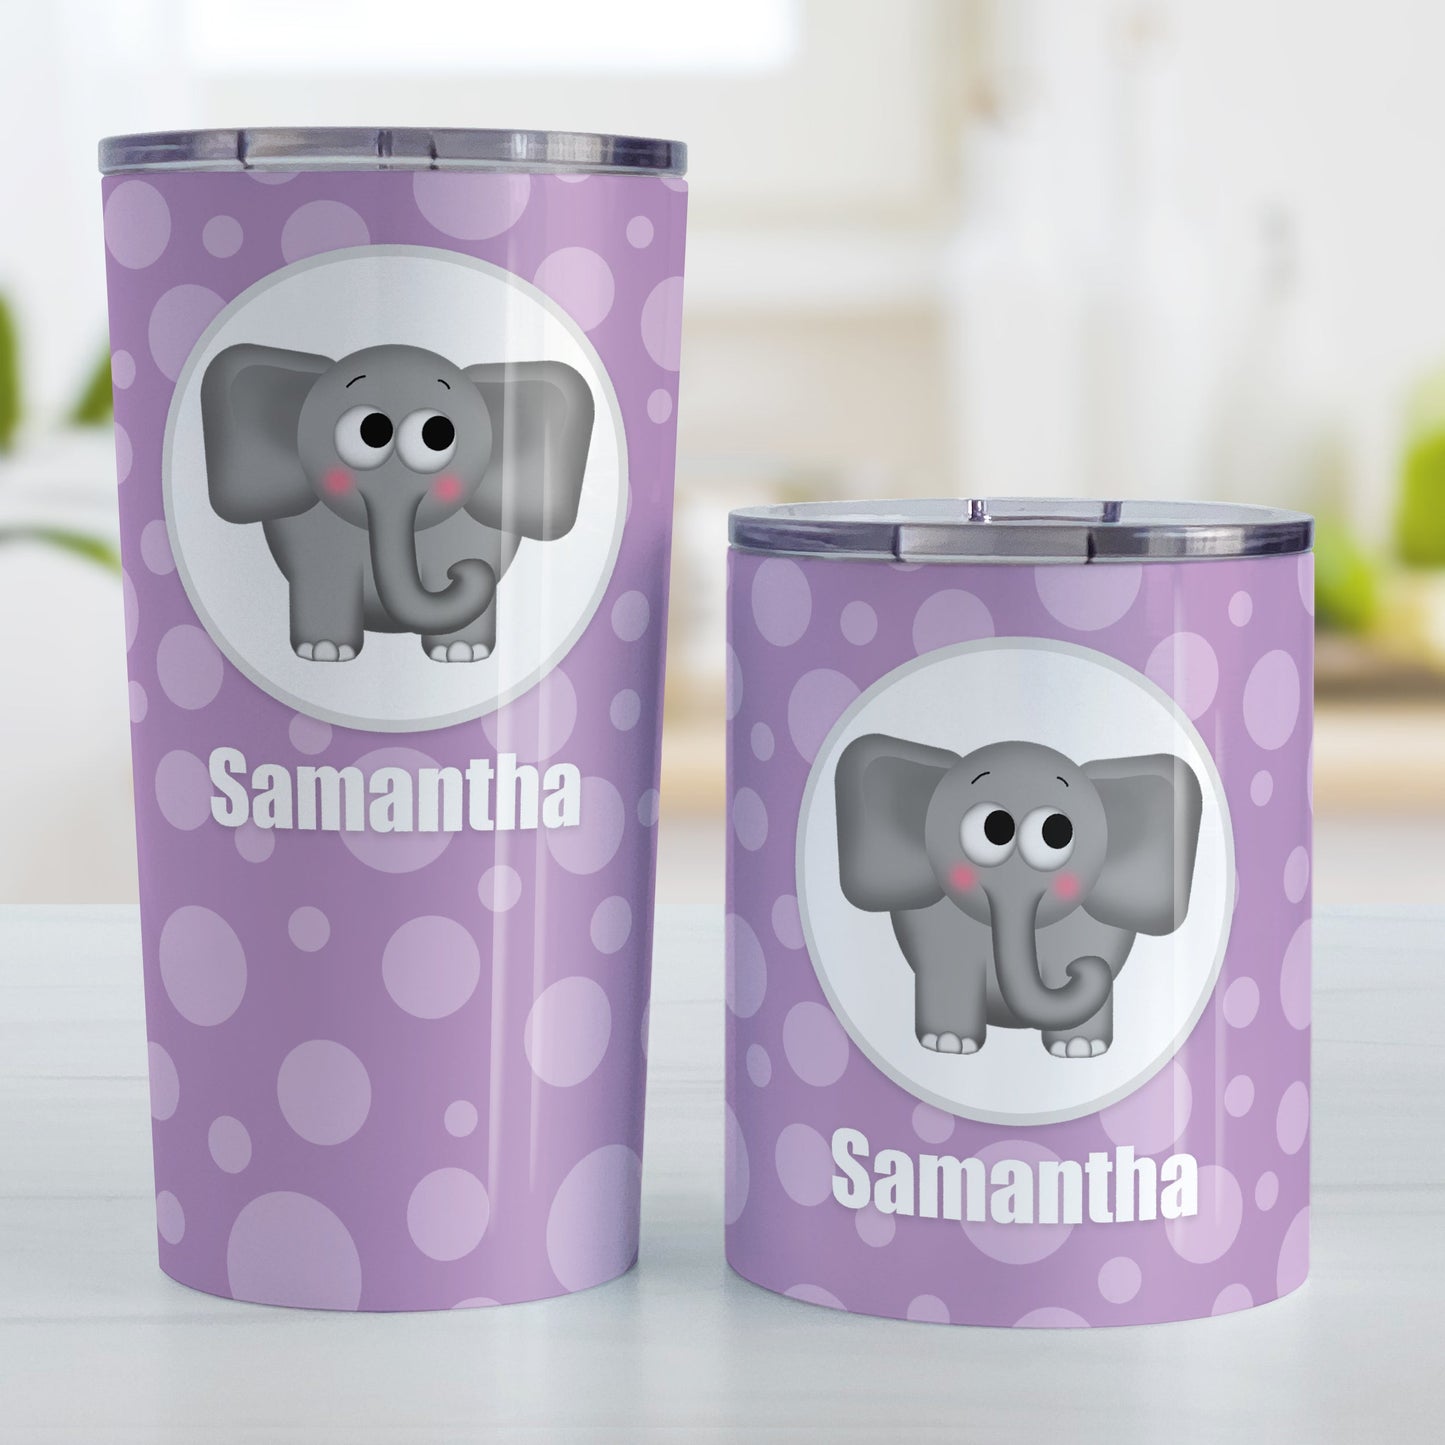 Cute Elephant Bubbly Purple Personalized Tumbler Cup (20oz and 10oz, stainless steel insulated) at Amy's Coffee Mugs